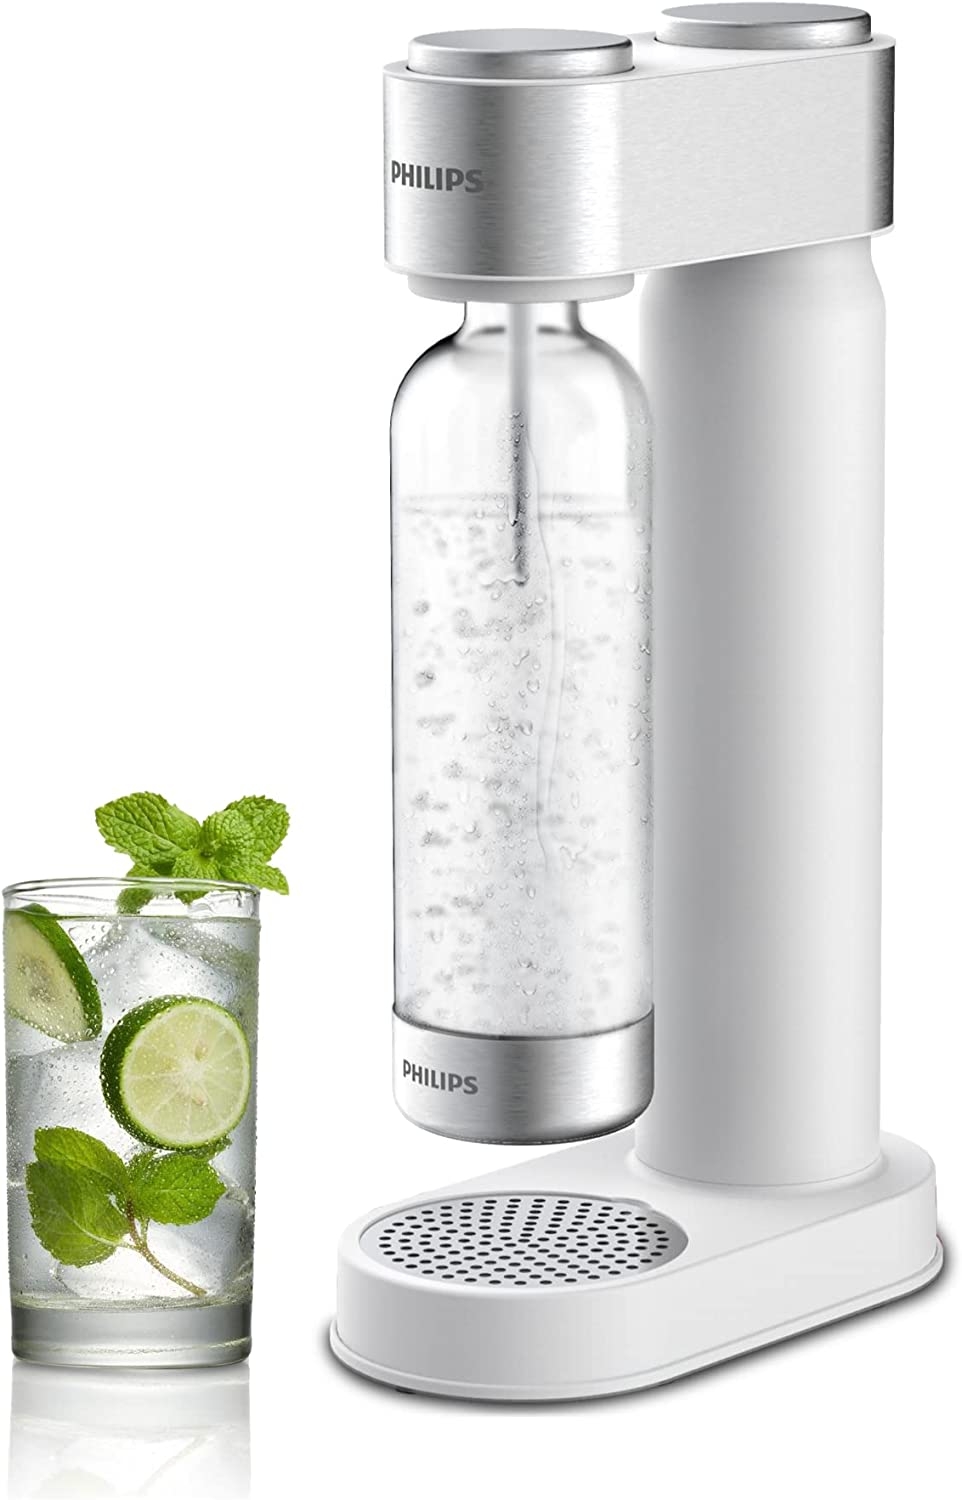 Philips Stainless Sparkling Water Maker Soda Maker Machine for Home Carbonating with BPA free PET 1L Carbonating Bottle,